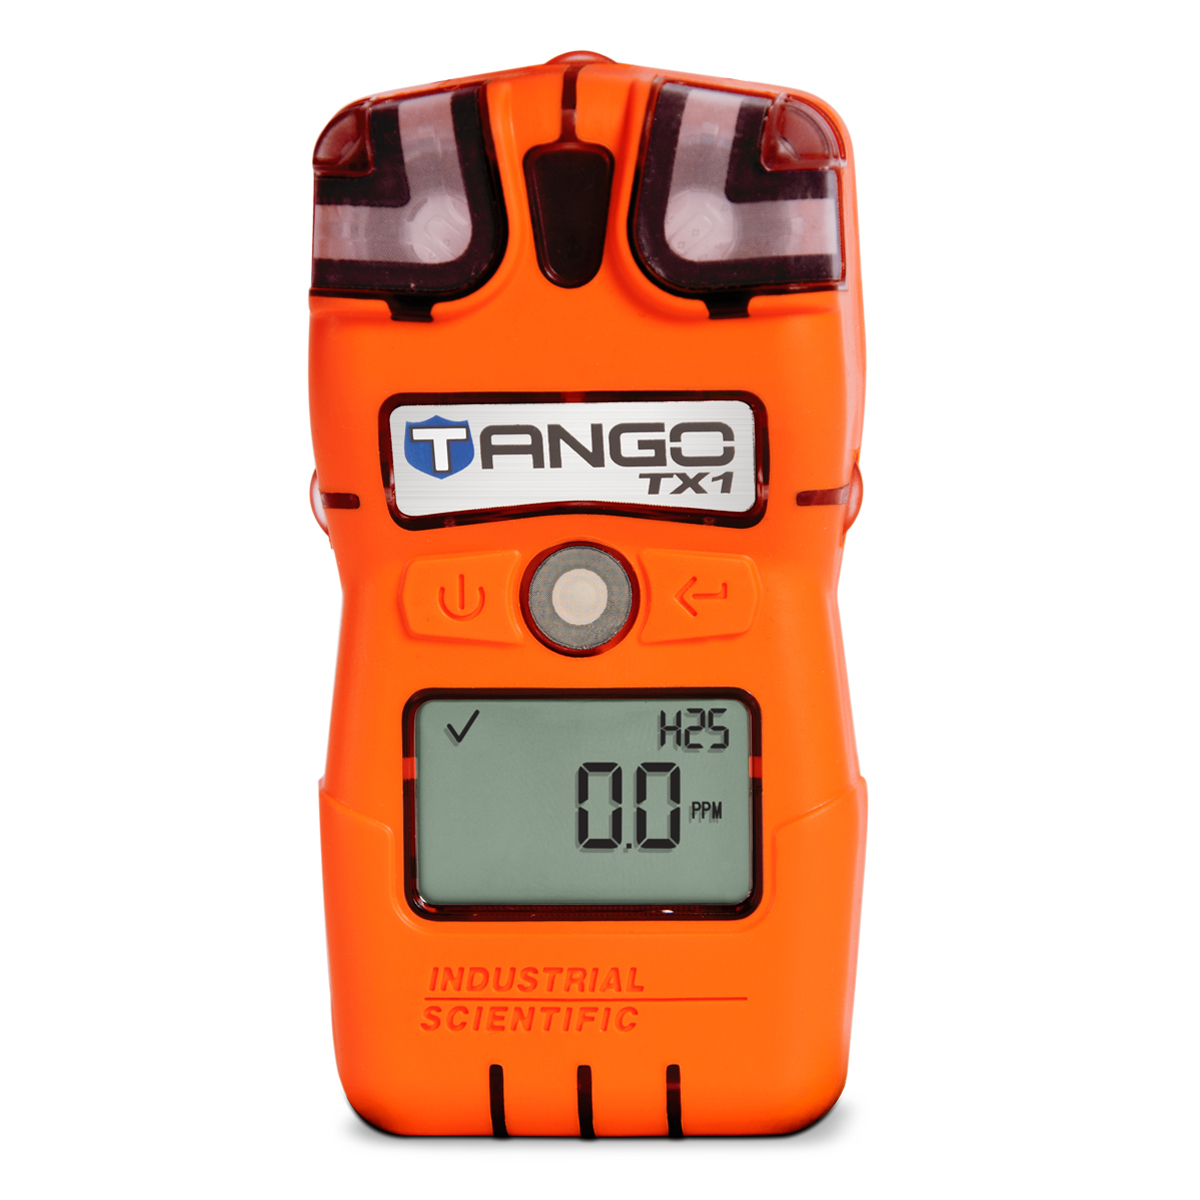 Industrial Scientific Tango™ TX1 Portable Carbon Monoxide And Low Hydrogen Interference Monitor